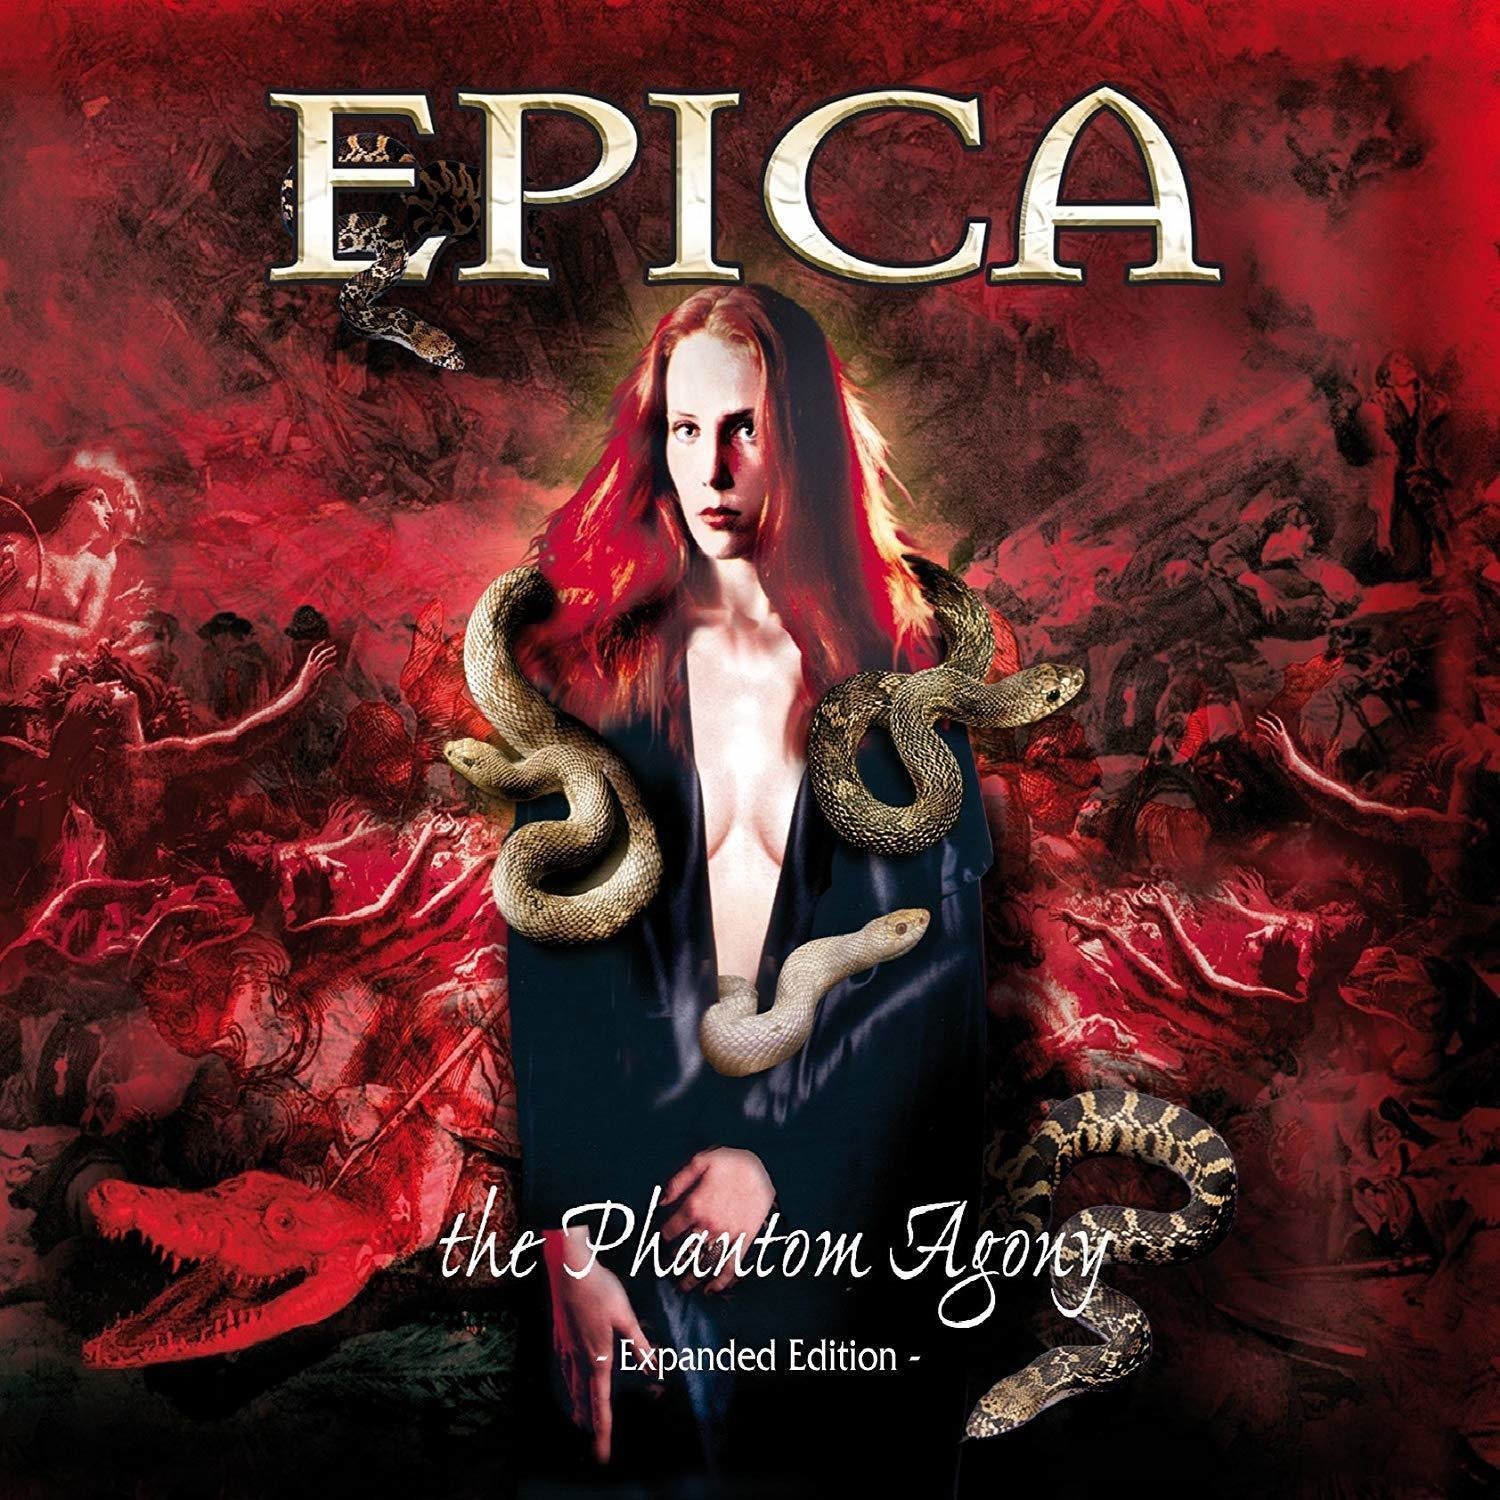 Disco in vinile Epica - The Phantom Agony - Expanded Edition (2 LP)